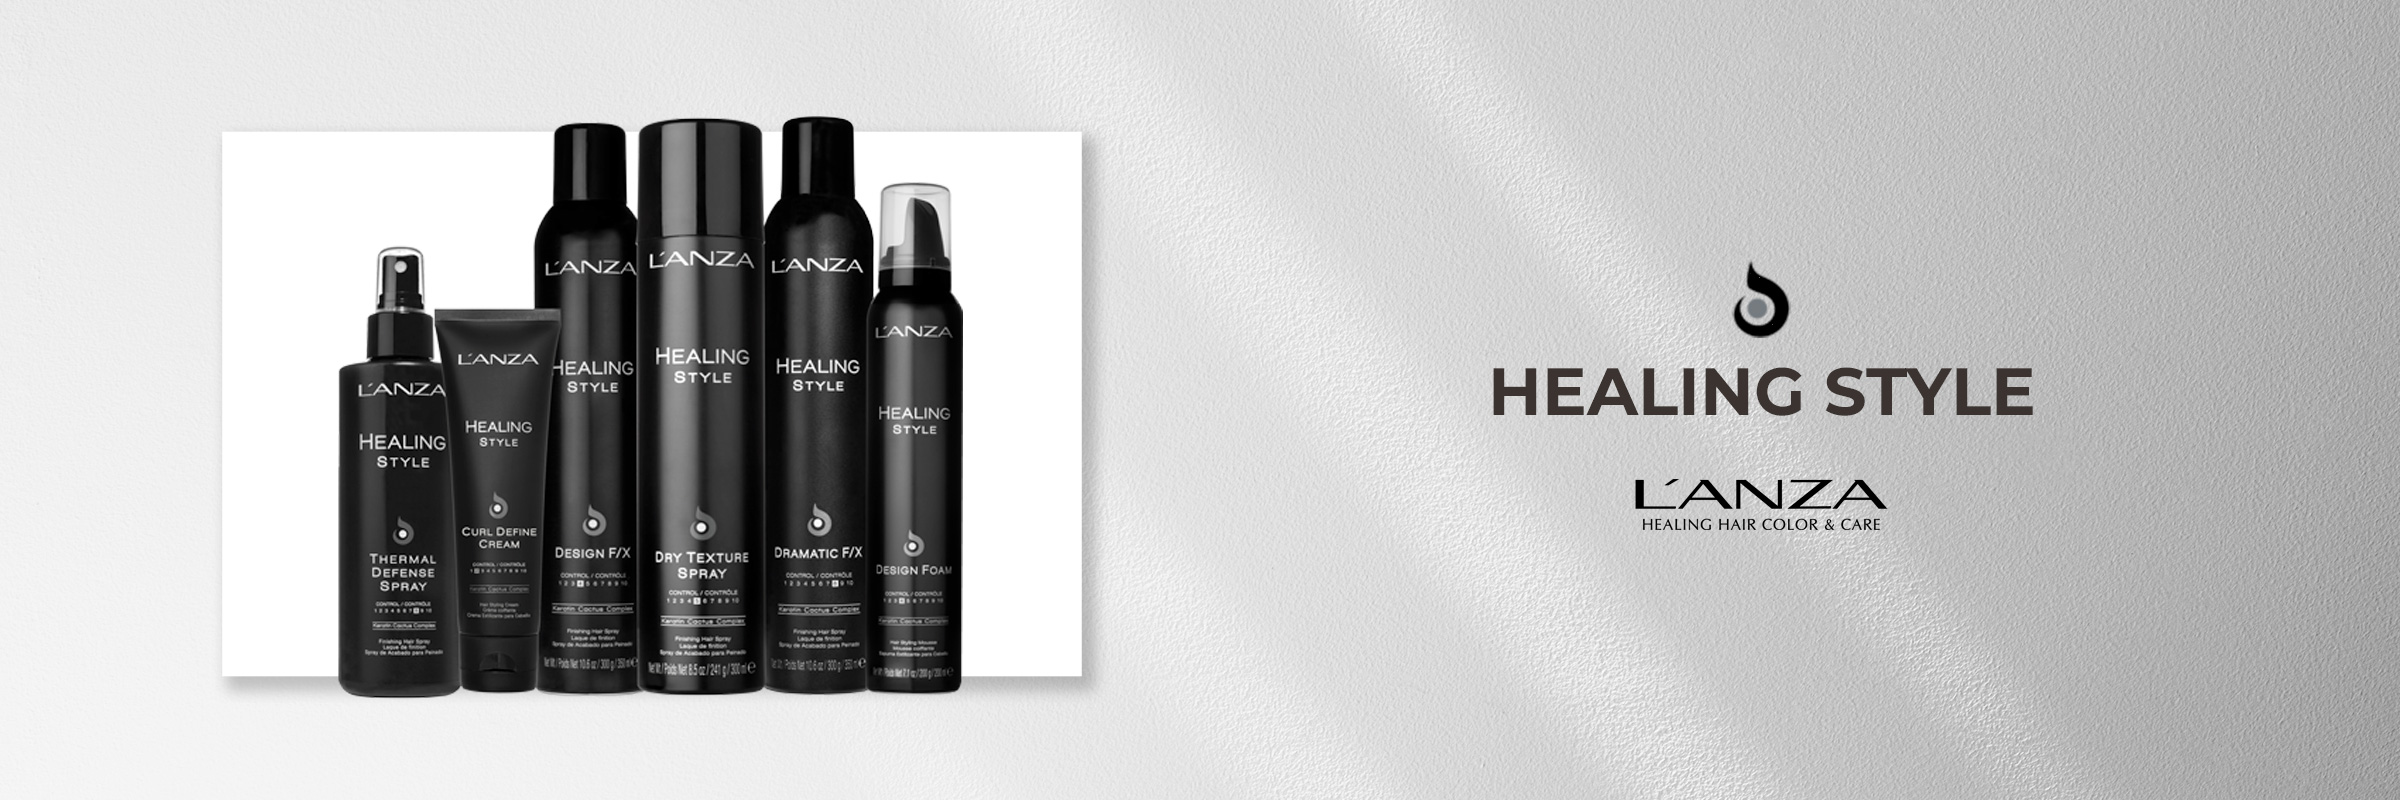 L'Anza Healing Hair Color & Care Healing Style